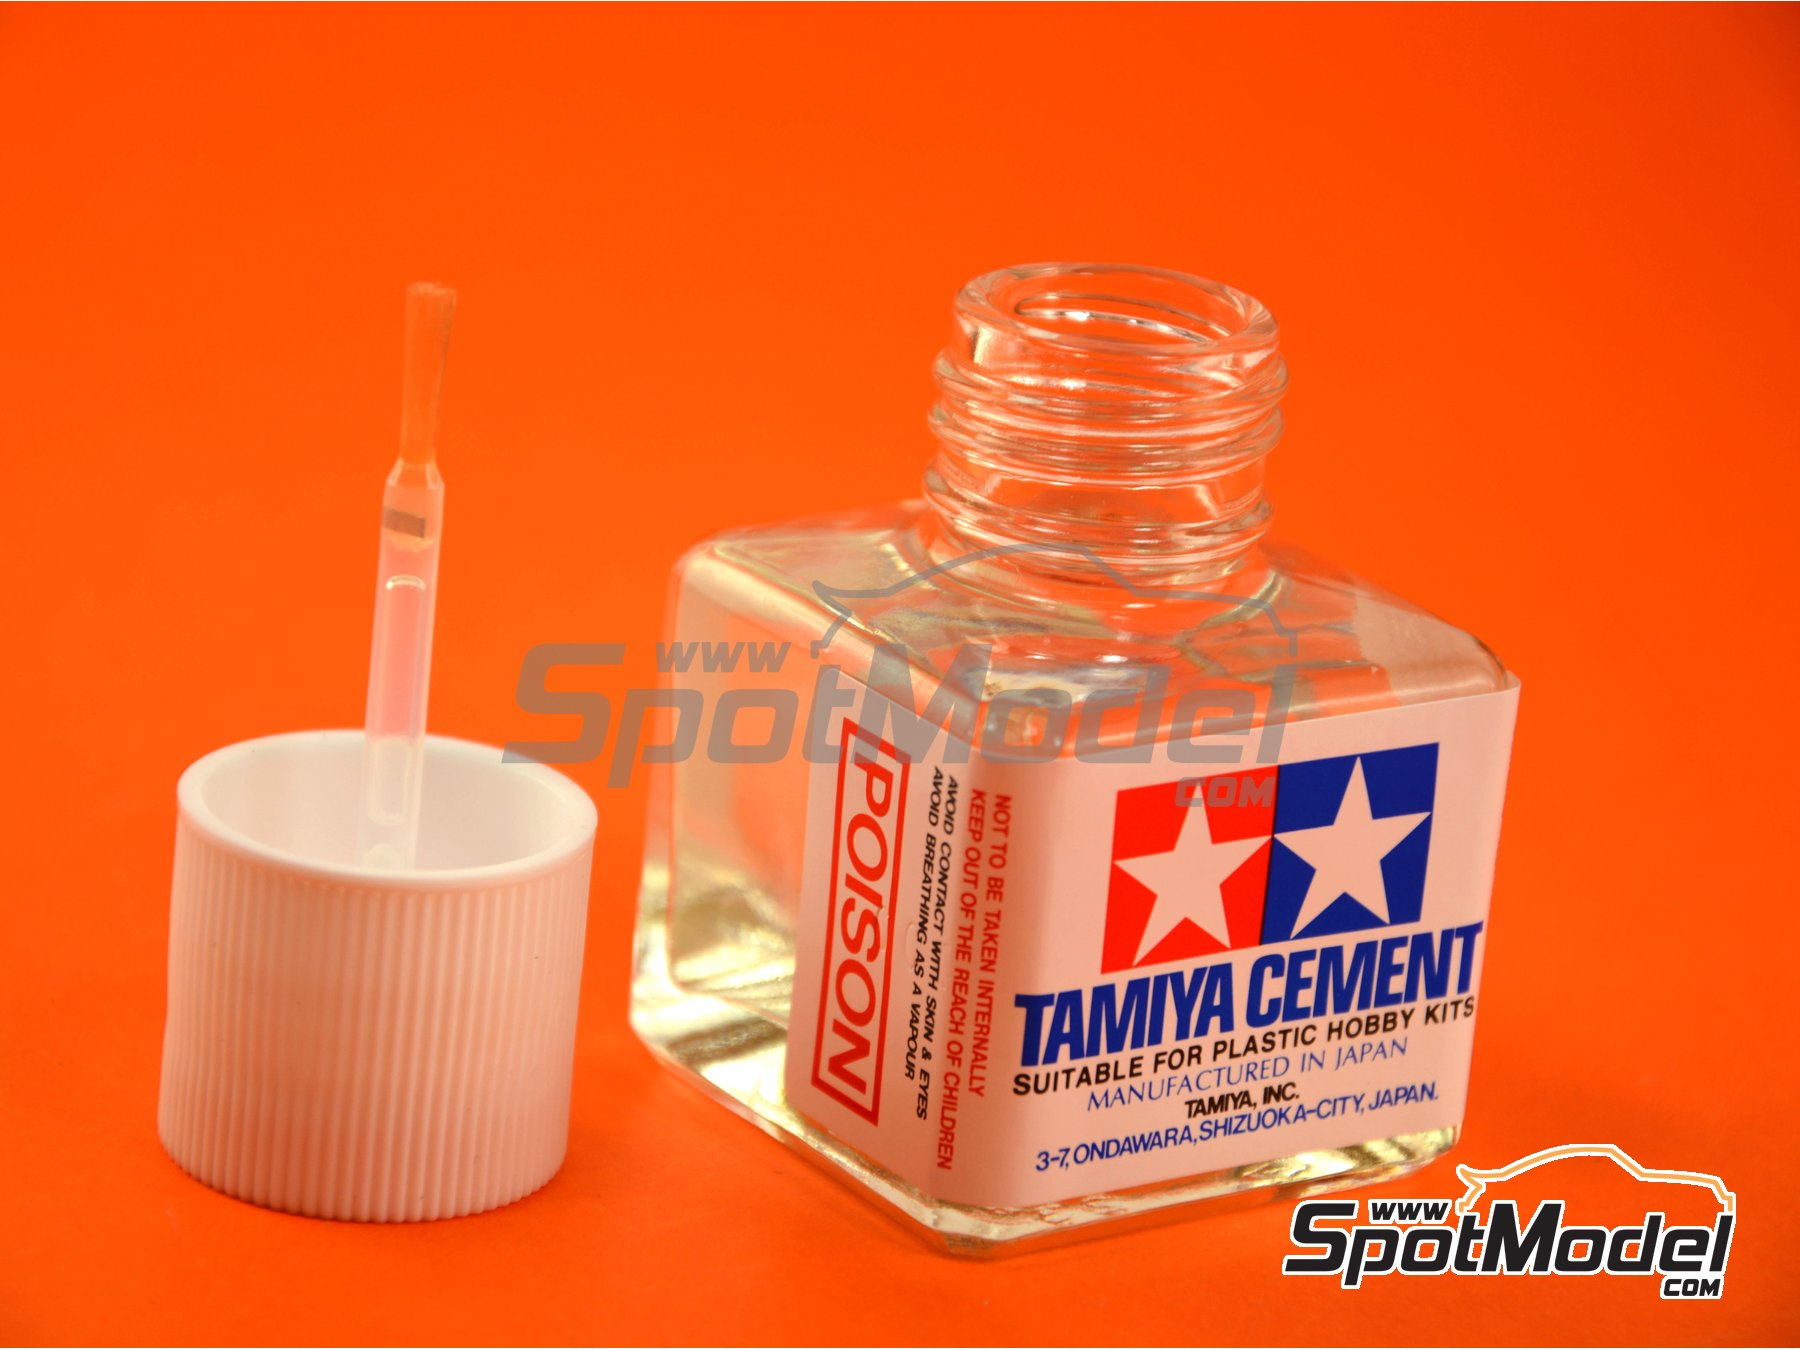 TAMIYA PLASTIC MODEL CEMENT 40ML BOTTLE WITH BRUSH 87003, Afterpay  available